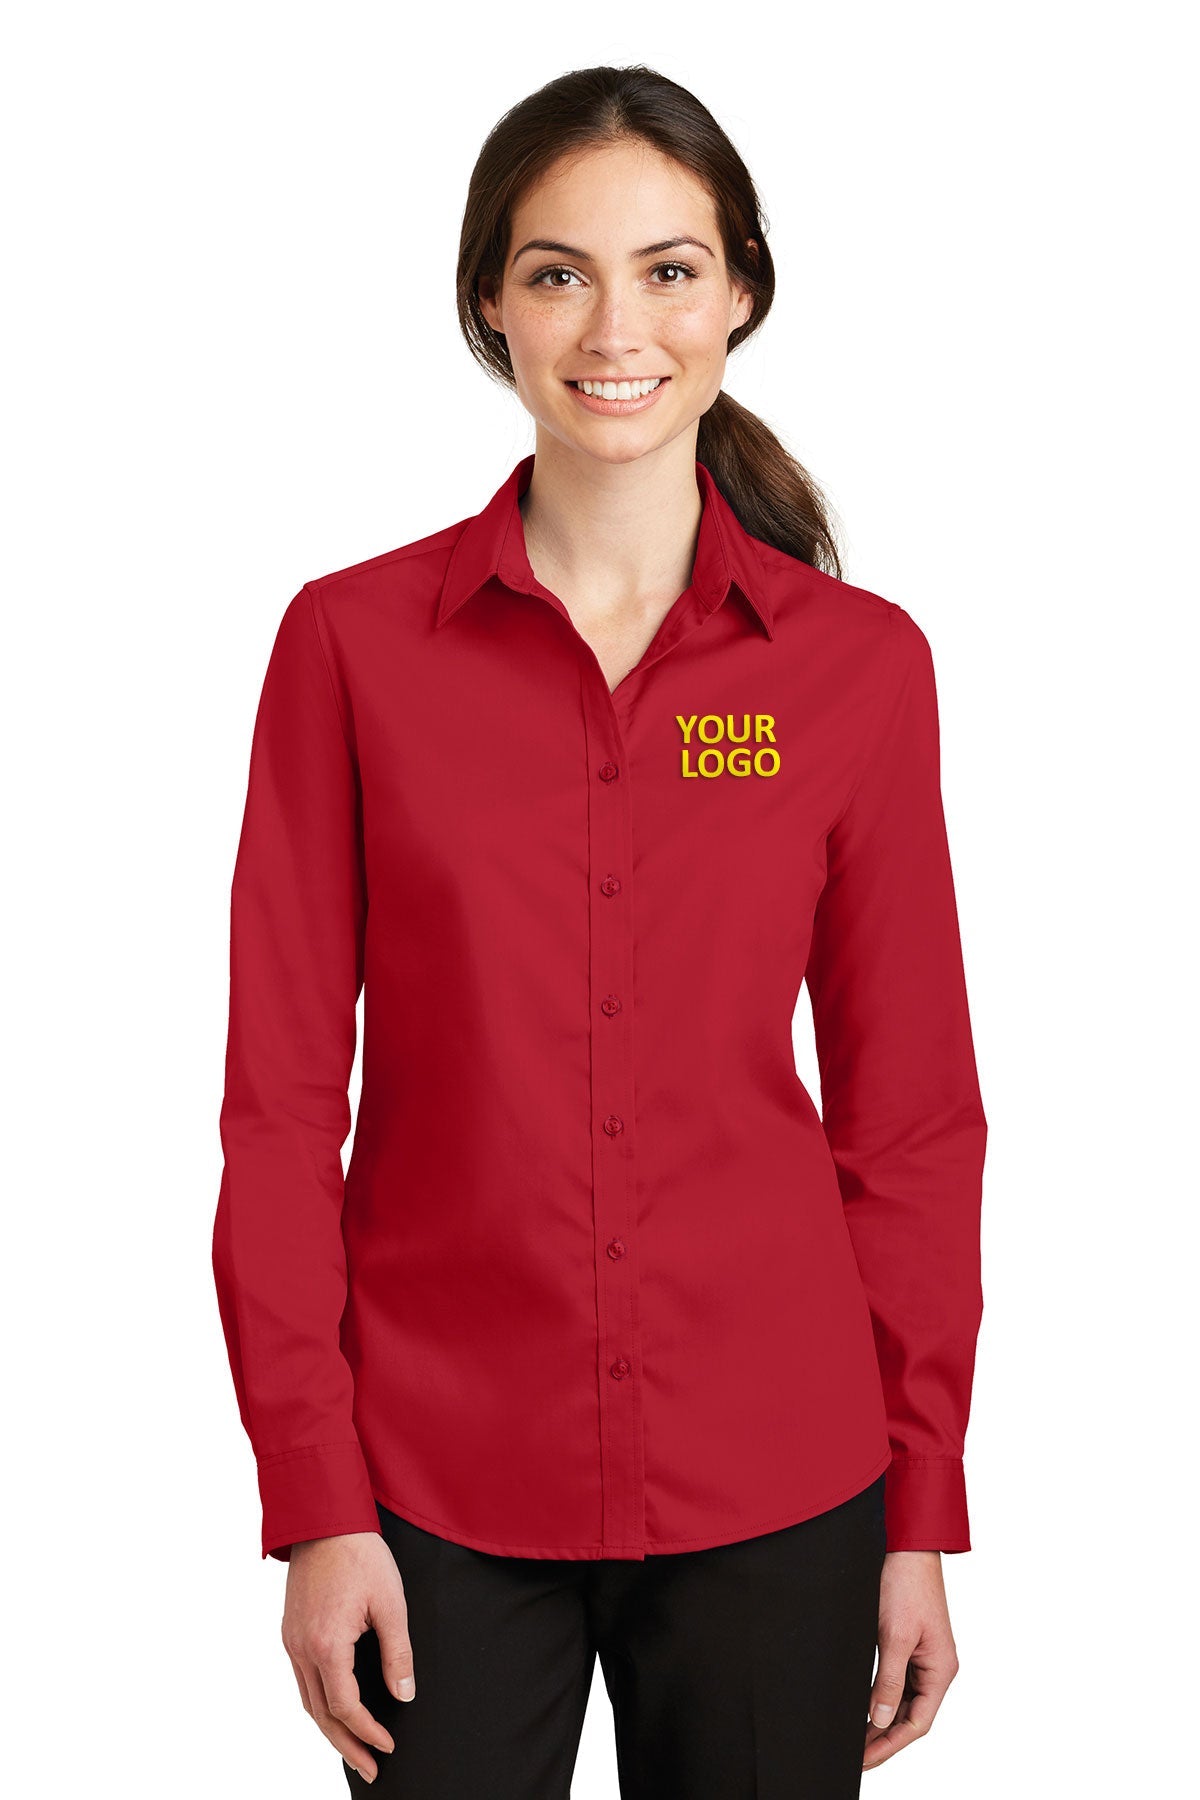 Port Authority Rich Red L663 custom work shirts